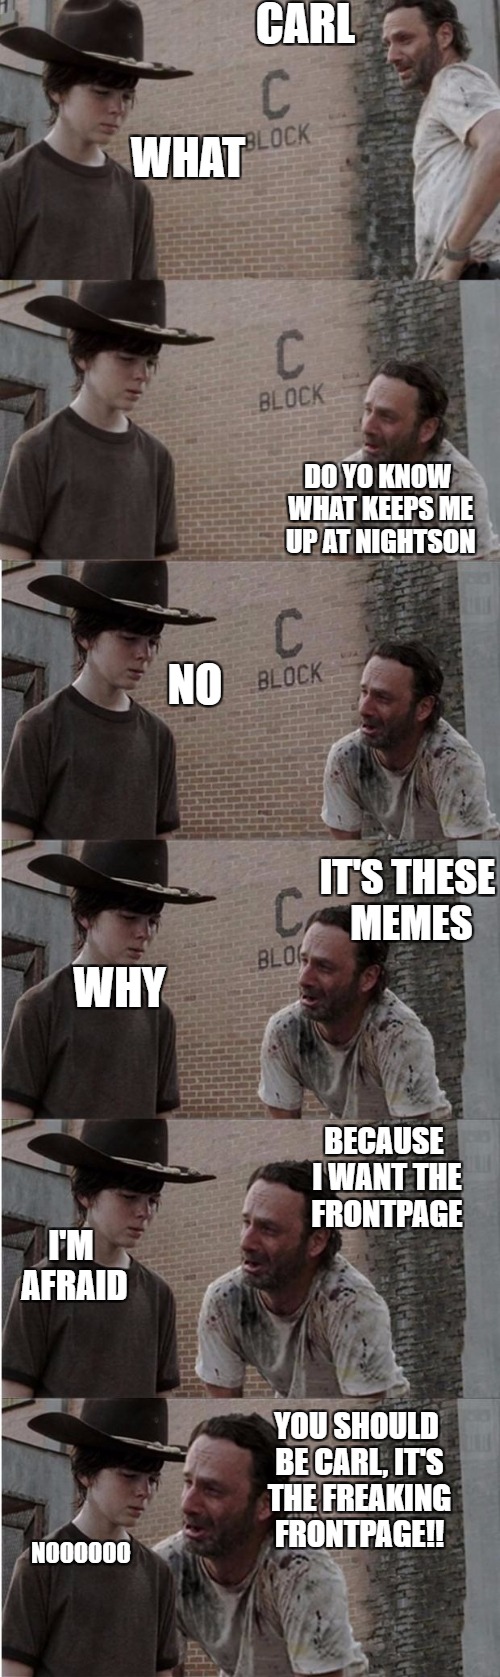 Rick and Carl Longer Meme | CARL; WHAT; DO YO KNOW WHAT KEEPS ME UP AT NIGHTSON; NO; IT'S THESE MEMES; WHY; BECAUSE I WANT THE FRONTPAGE; I'M AFRAID; YOU SHOULD BE CARL, IT'S THE FREAKING FRONTPAGE!! NOOOOOO | image tagged in memes,rick and carl longer | made w/ Imgflip meme maker